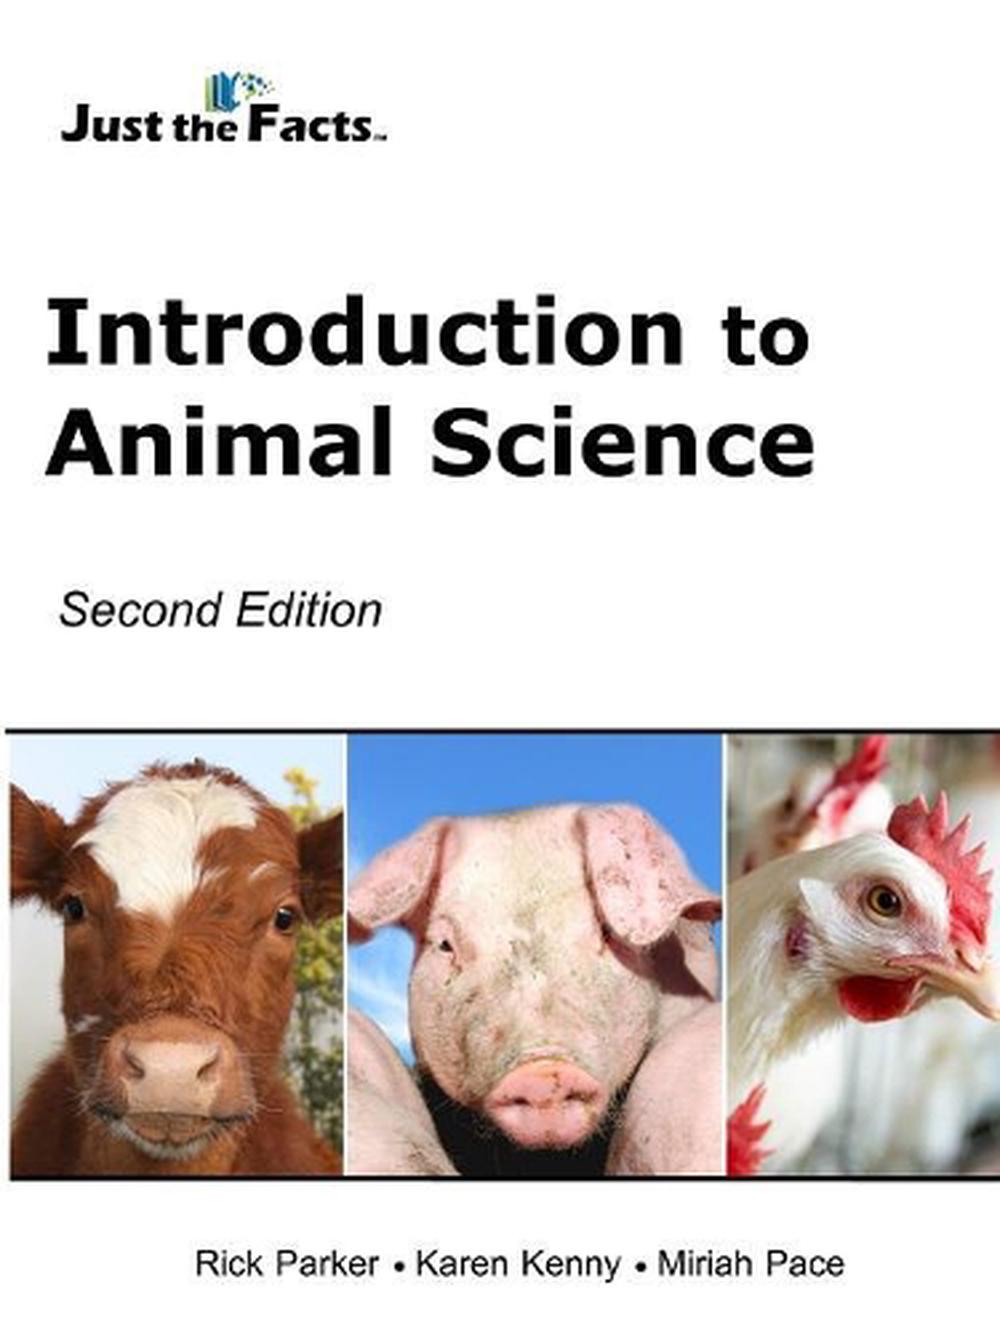 thesis title for animal science major